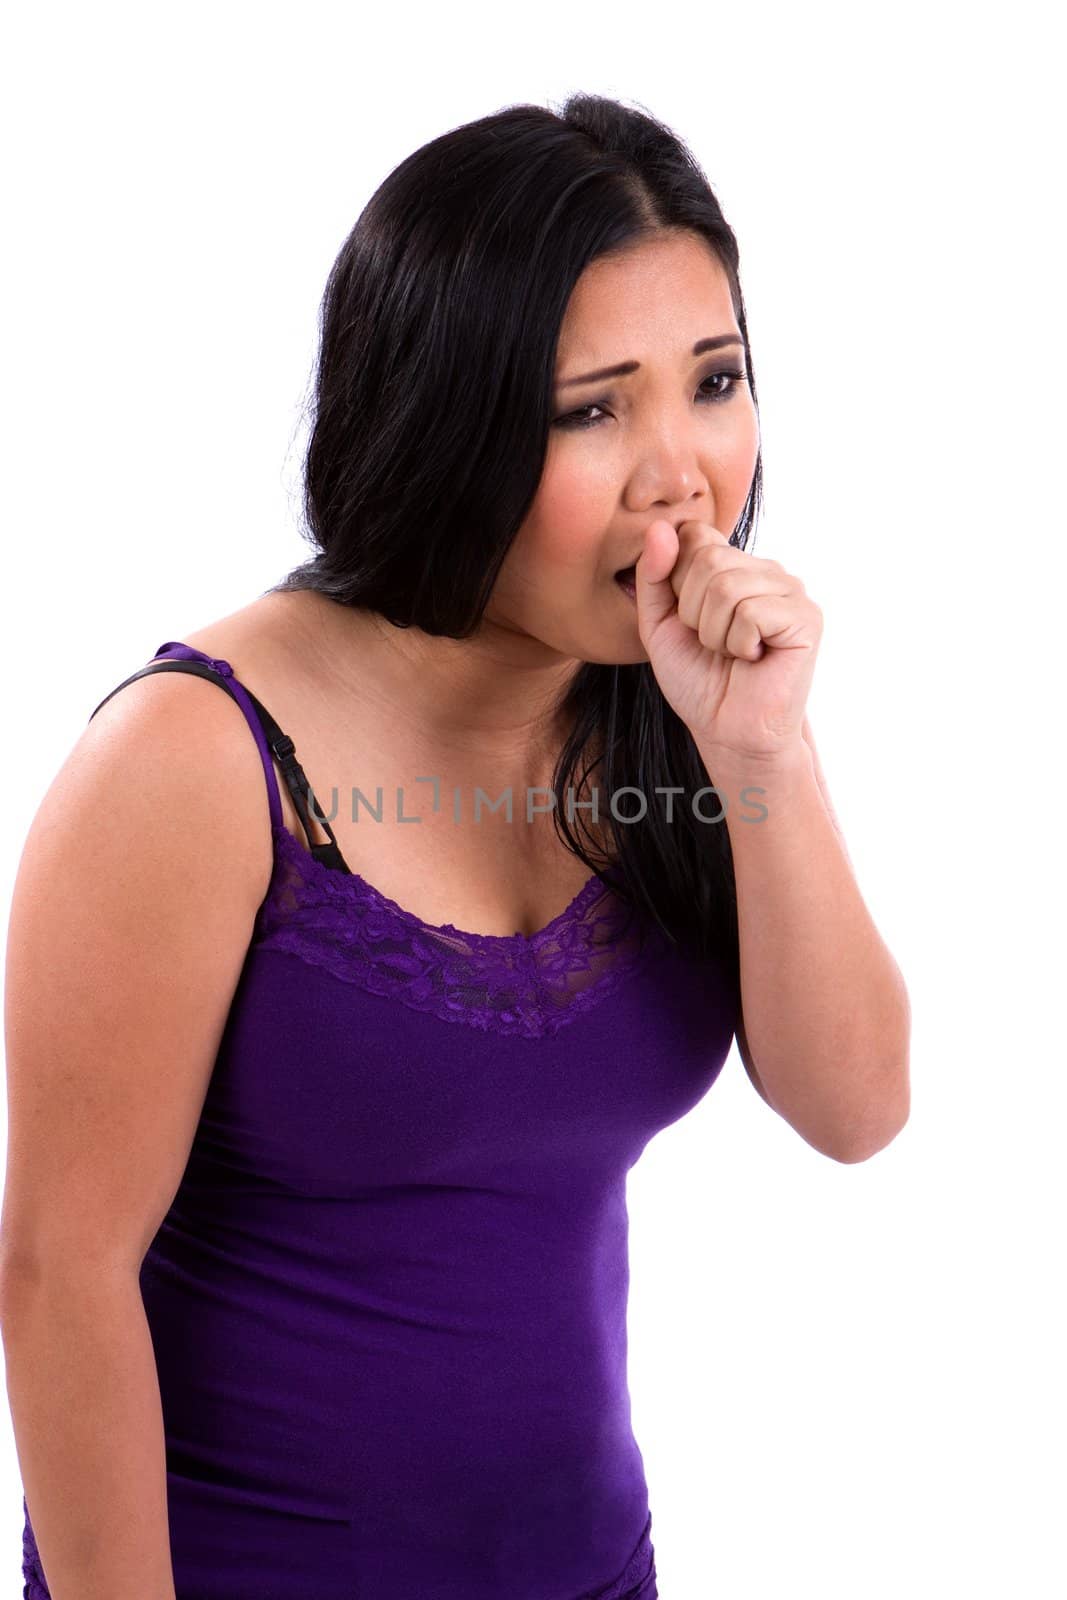 Asian teenager sick with a cold and flu coughs into her fist.